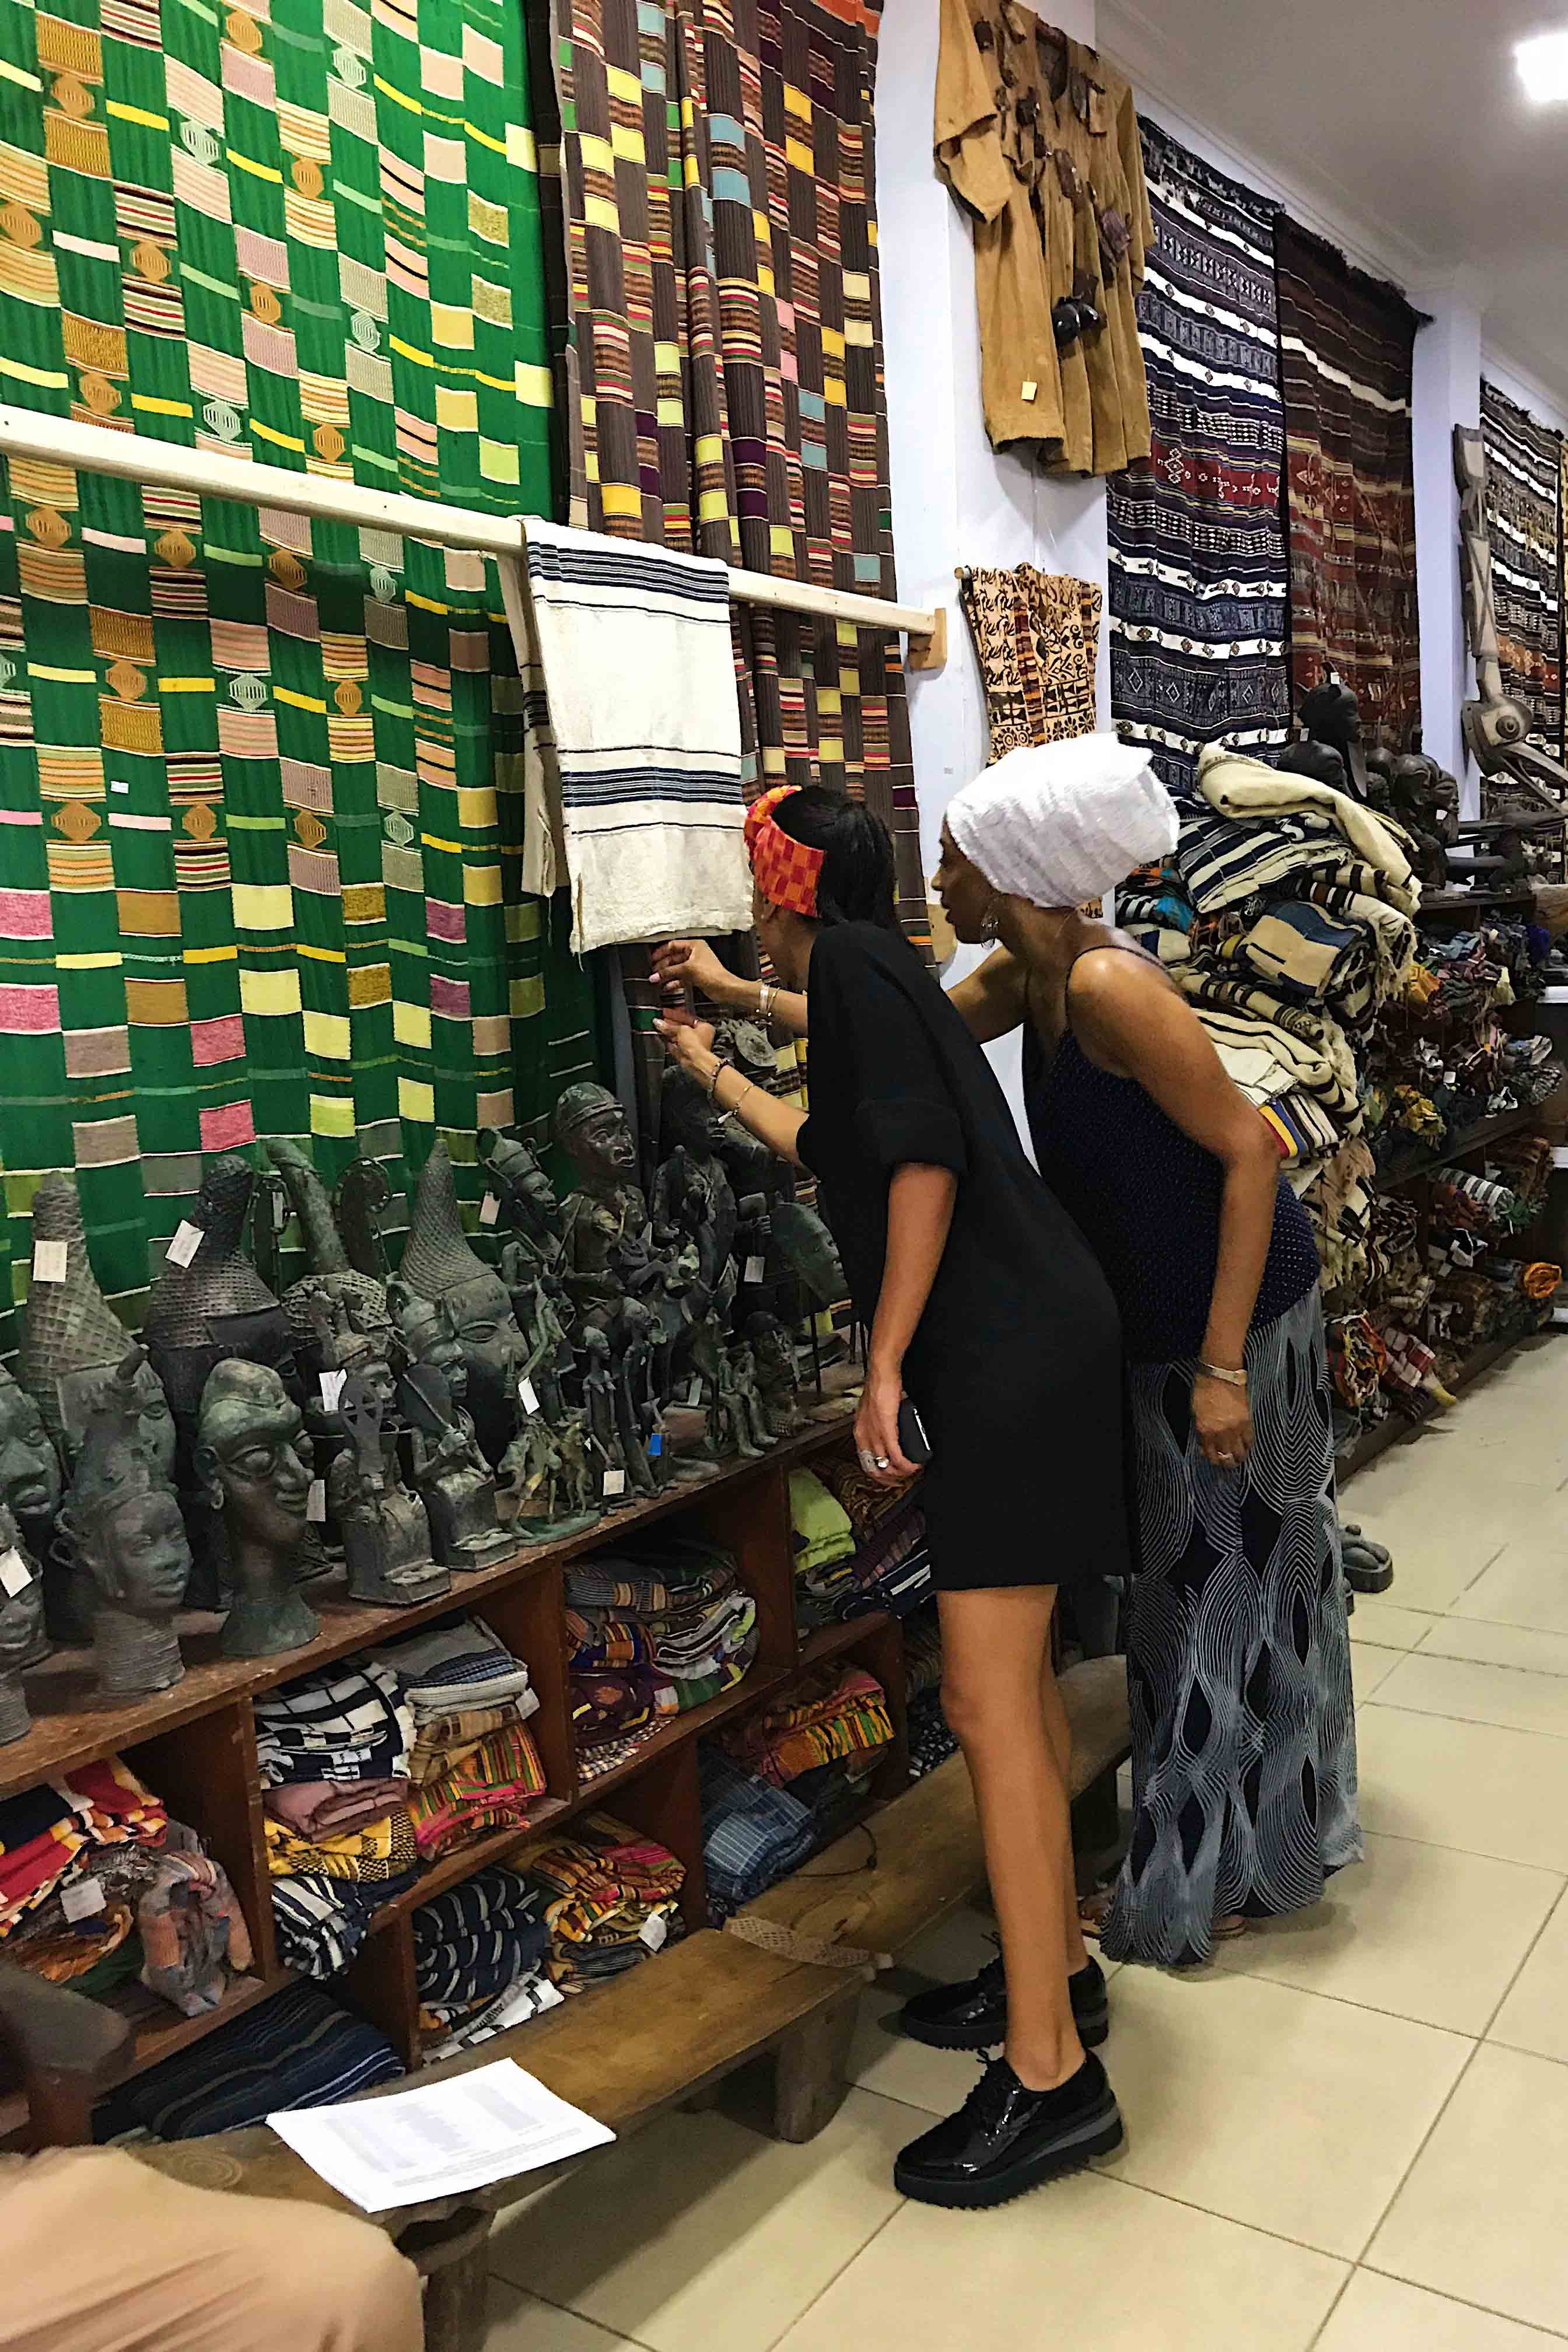 A Girlfriend’s Guide To 12 Hours In Accra, Ghana